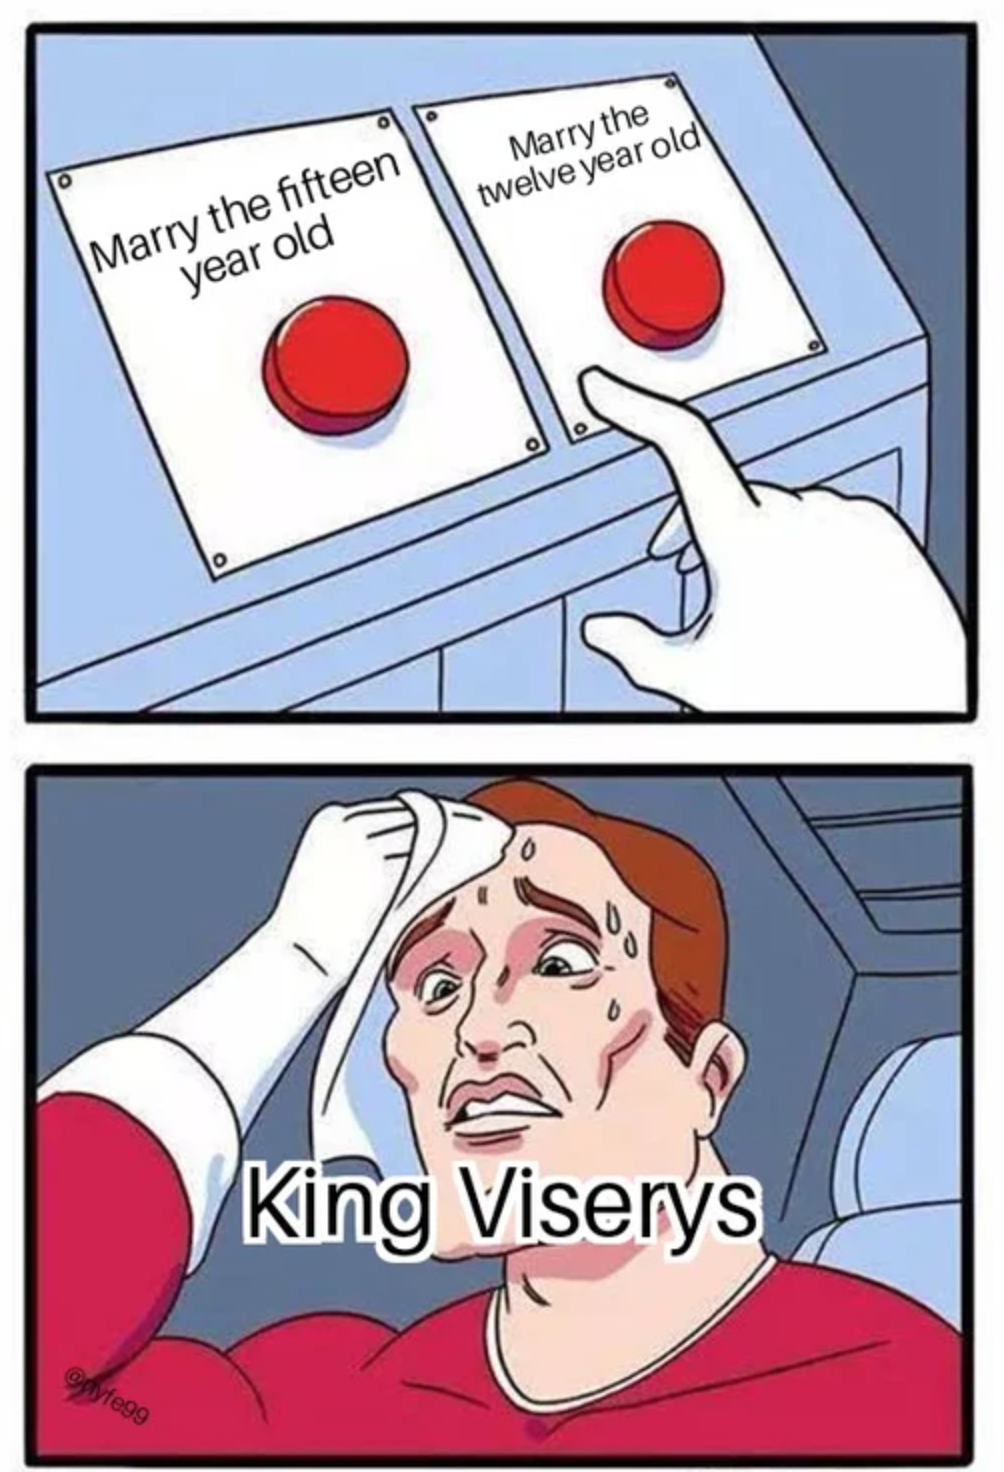 House of the Dragon Episode 2 memes - comics - Marry the fifteen year old Marry the twelve year old King Viserys